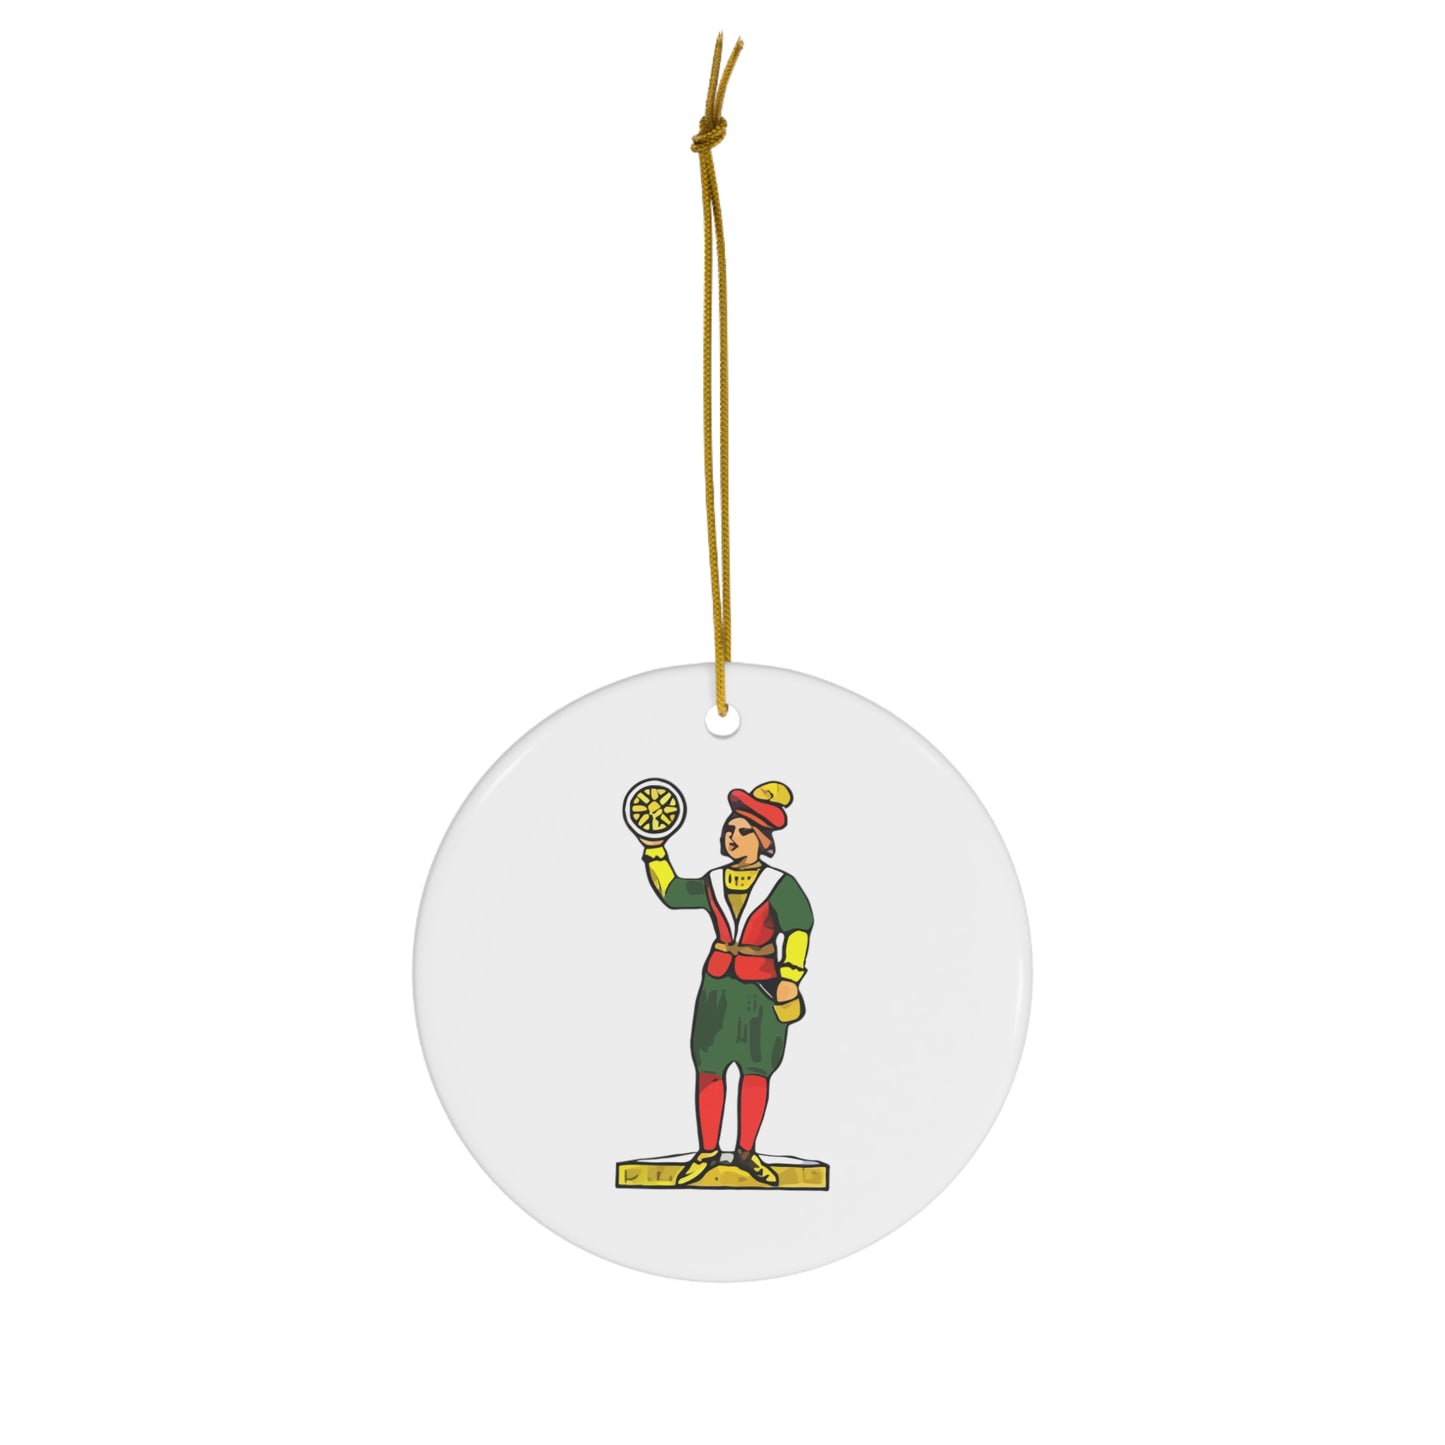 The Queen of Coins Ceramic Ornament